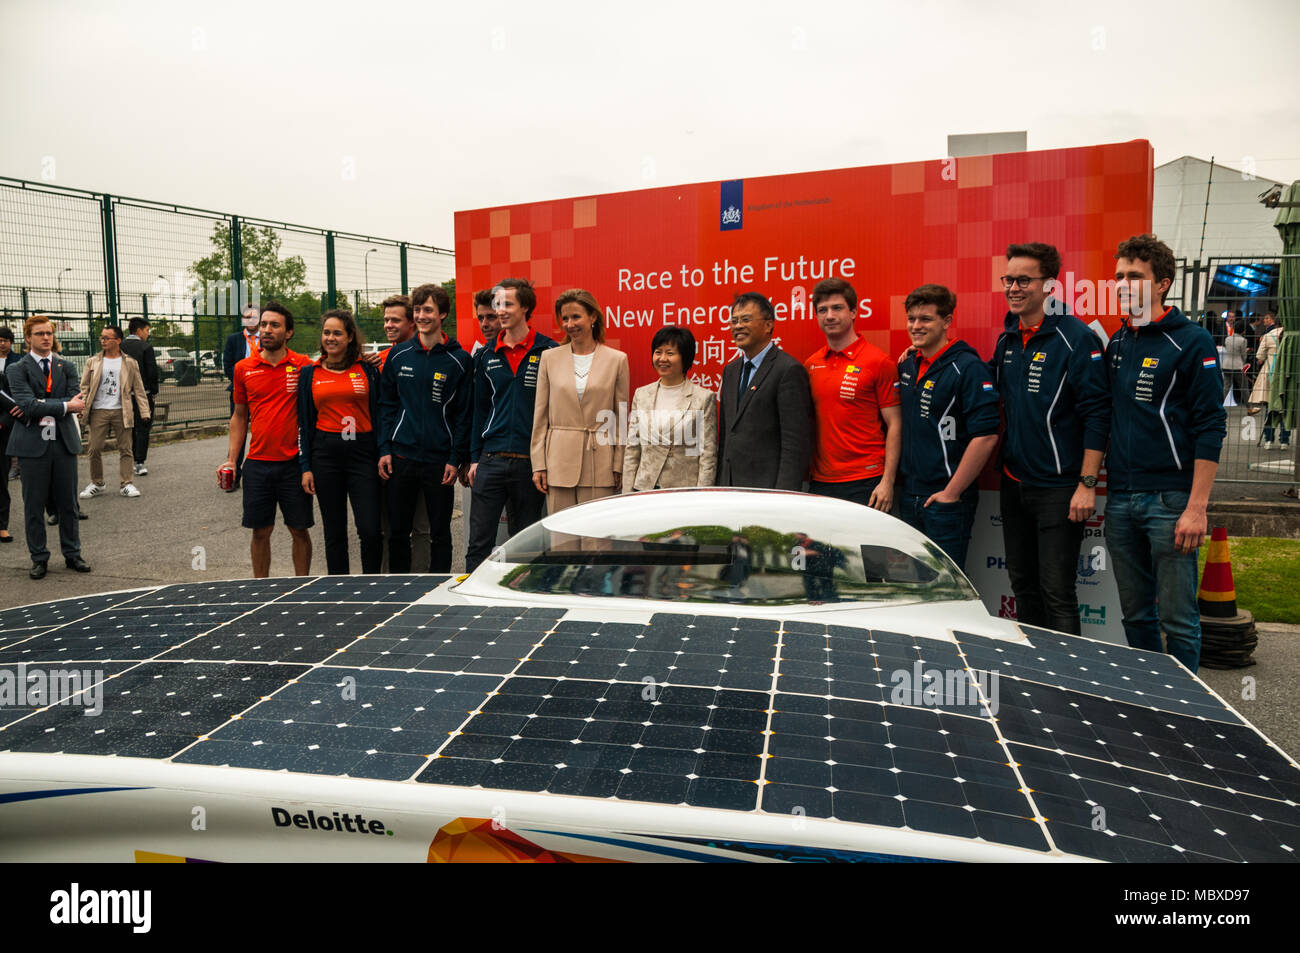 Shanghai, China. 12th April, 2018. Mrs Stientje van Velhoven State Secretary of Infrastructure and Water Management Kingdom of the Netherlands and Ms Lu Zufang Vice President, Jiading District with members of the Nuon Solar Team from the Netherlands at the Race to the Future, New Energy Vehicles event in Shanghai held at the autonomous vehicle testing ground in Anting, Shanghai. Credit: Mark Andrews/Alamy Live News Stock Photo